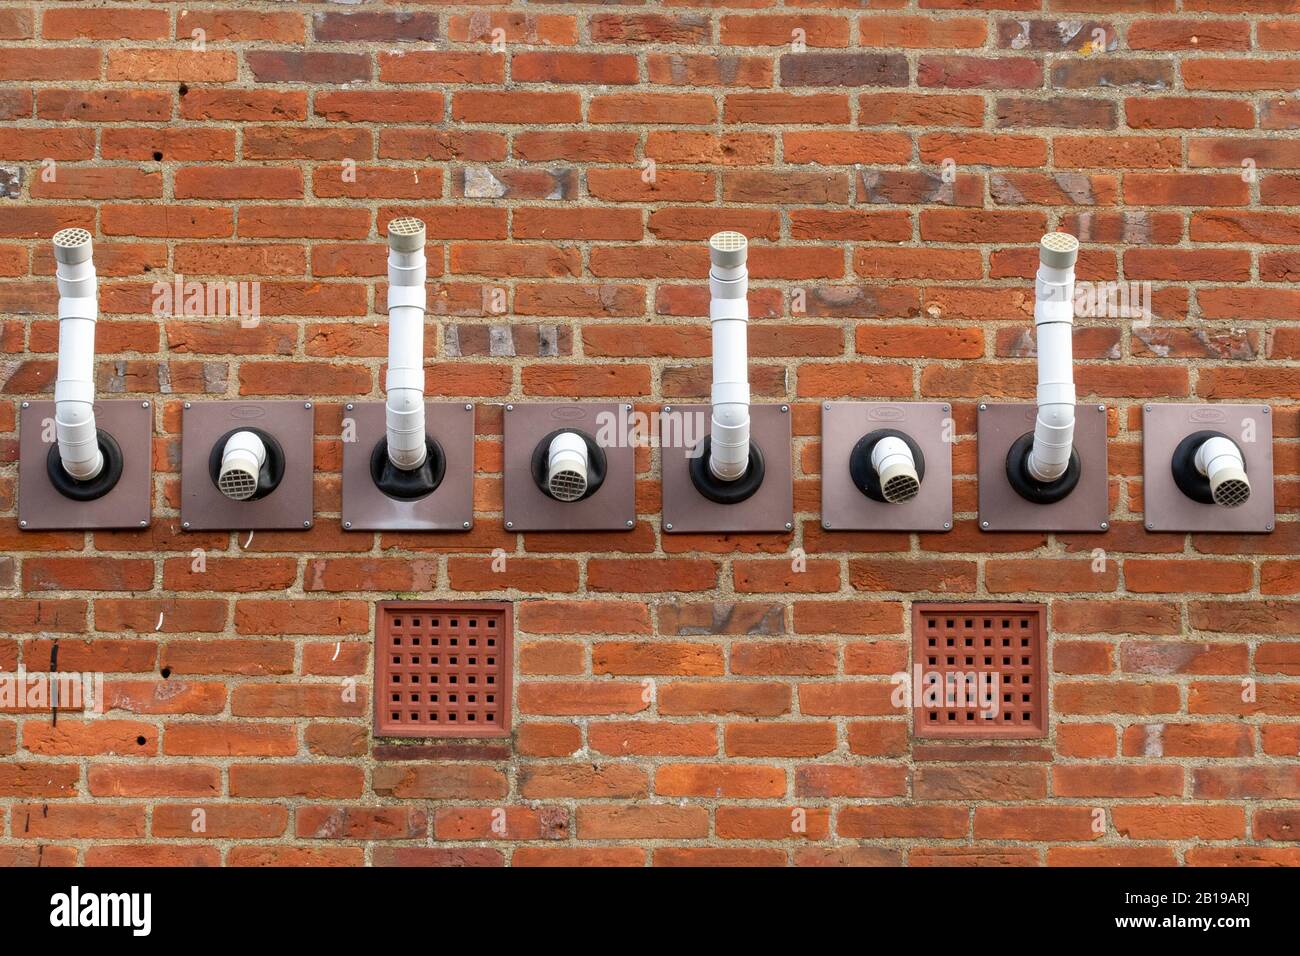 Alternating air intake and exhaust vents or pipes for boiler or furnace on the outside wall of a building Stock Photo